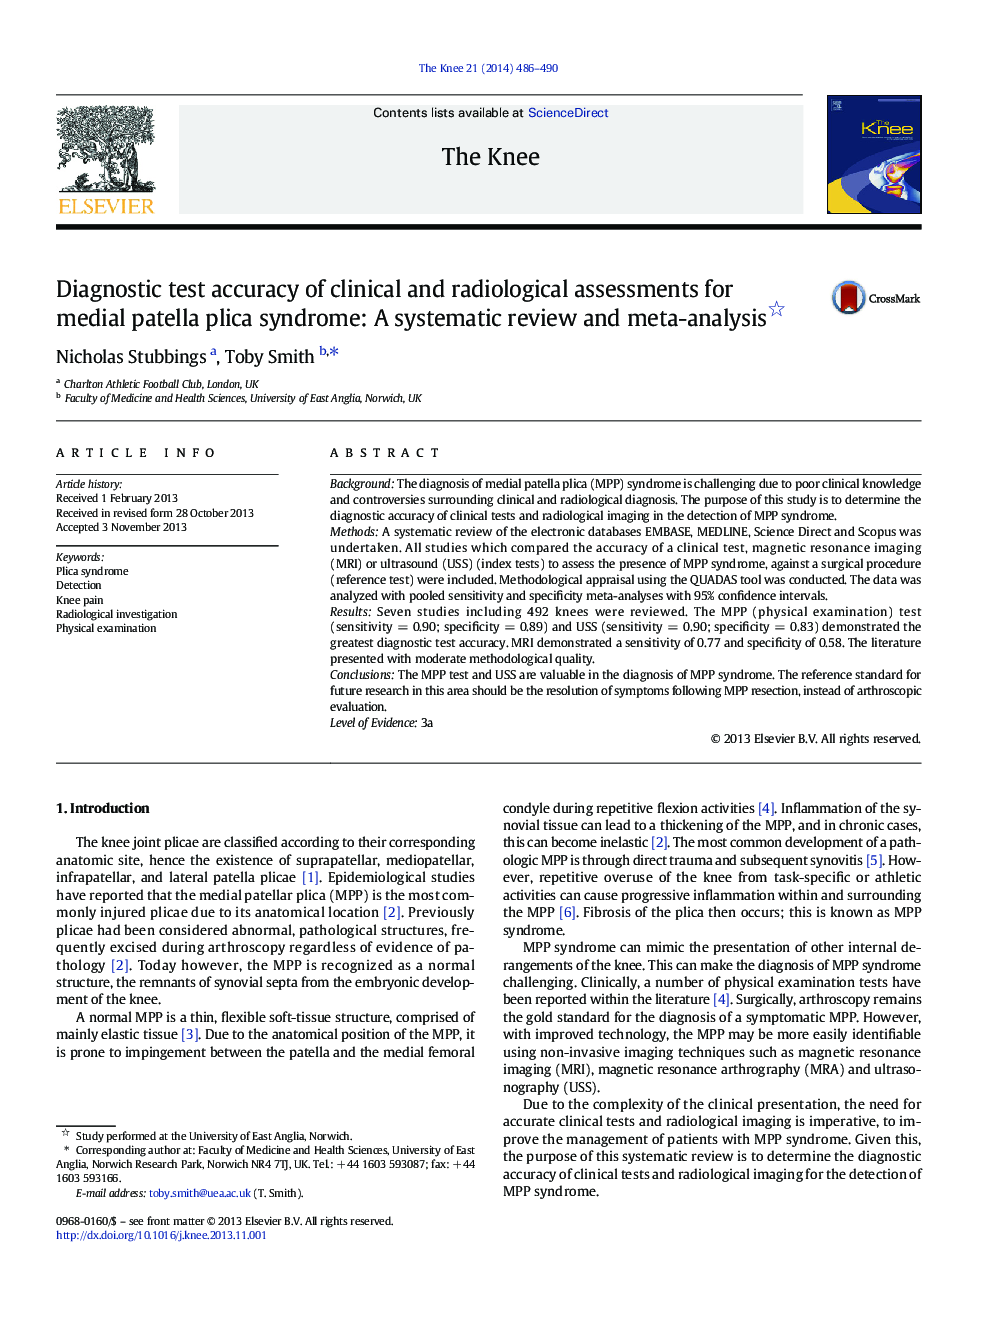 Diagnostic test accuracy of clinical and radiological assessments for medial patella plica syndrome: A systematic review and meta-analysis 